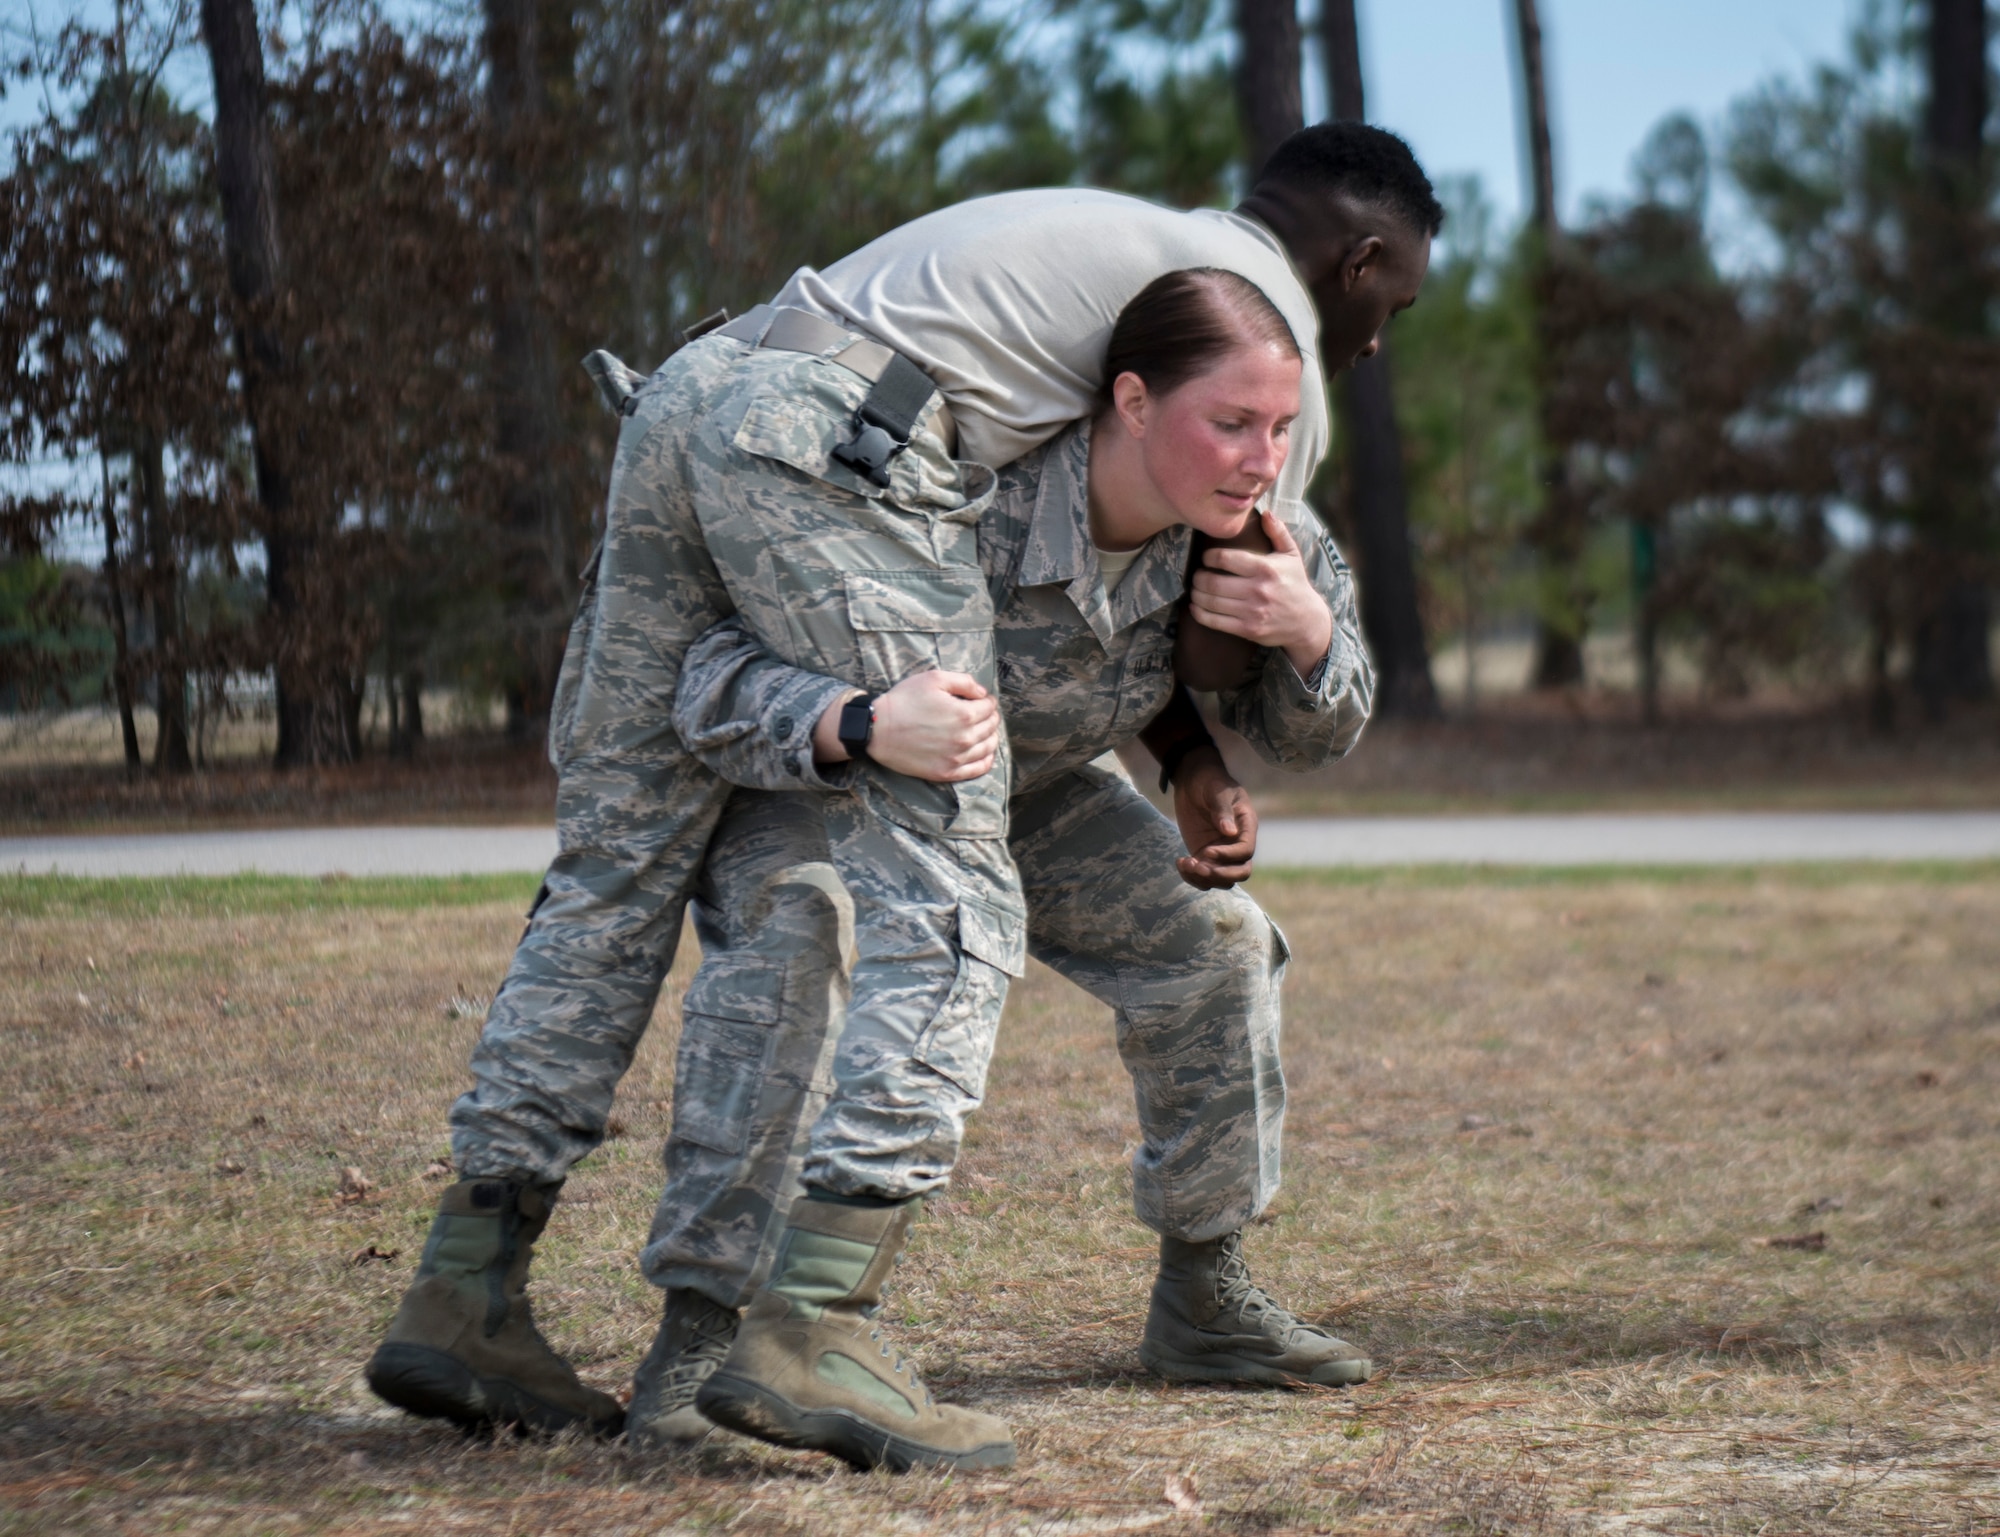 U.S. Air Force Staff Sgt. Heather Seifert-Olson, 20th Security Forces Squadron installation patrolman, fireman carries a wingman during physical training at Shaw Air Force Base, S.C., Feb. 6, 2019.